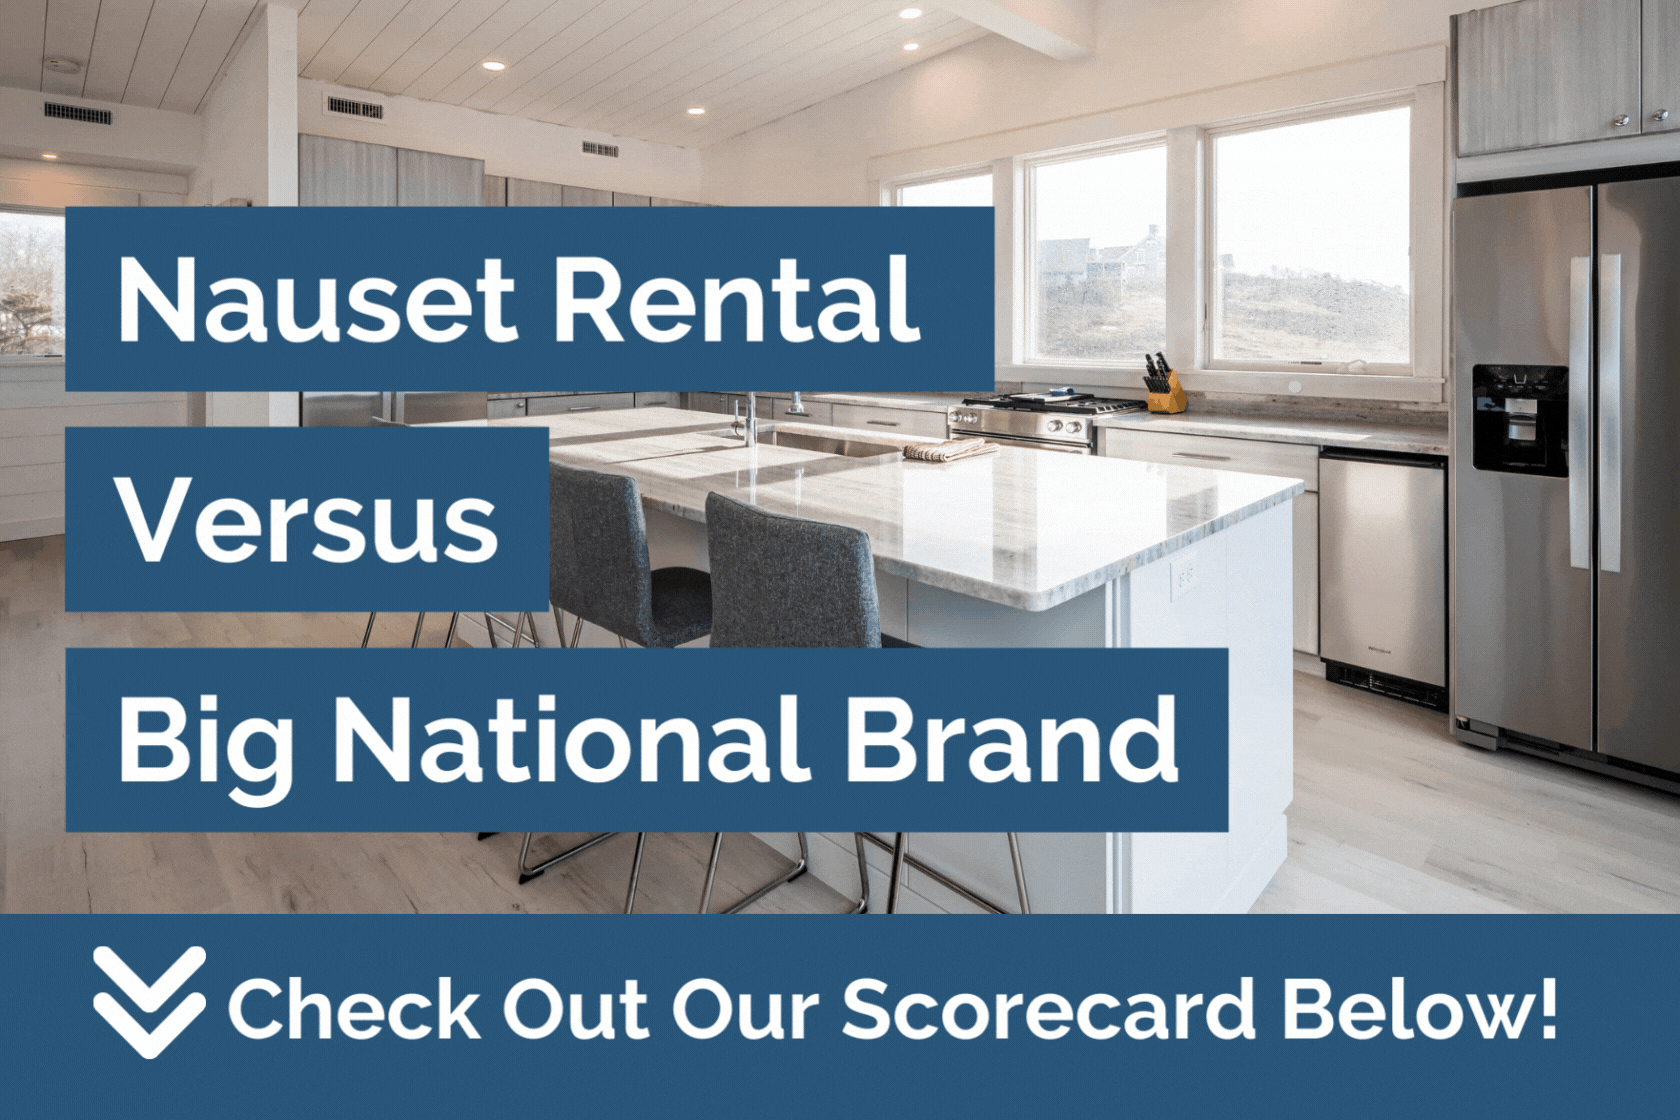 Choosing a rental management company can be tough! Here's what makes Nauset Rental better for homeowners than the Big National Brands